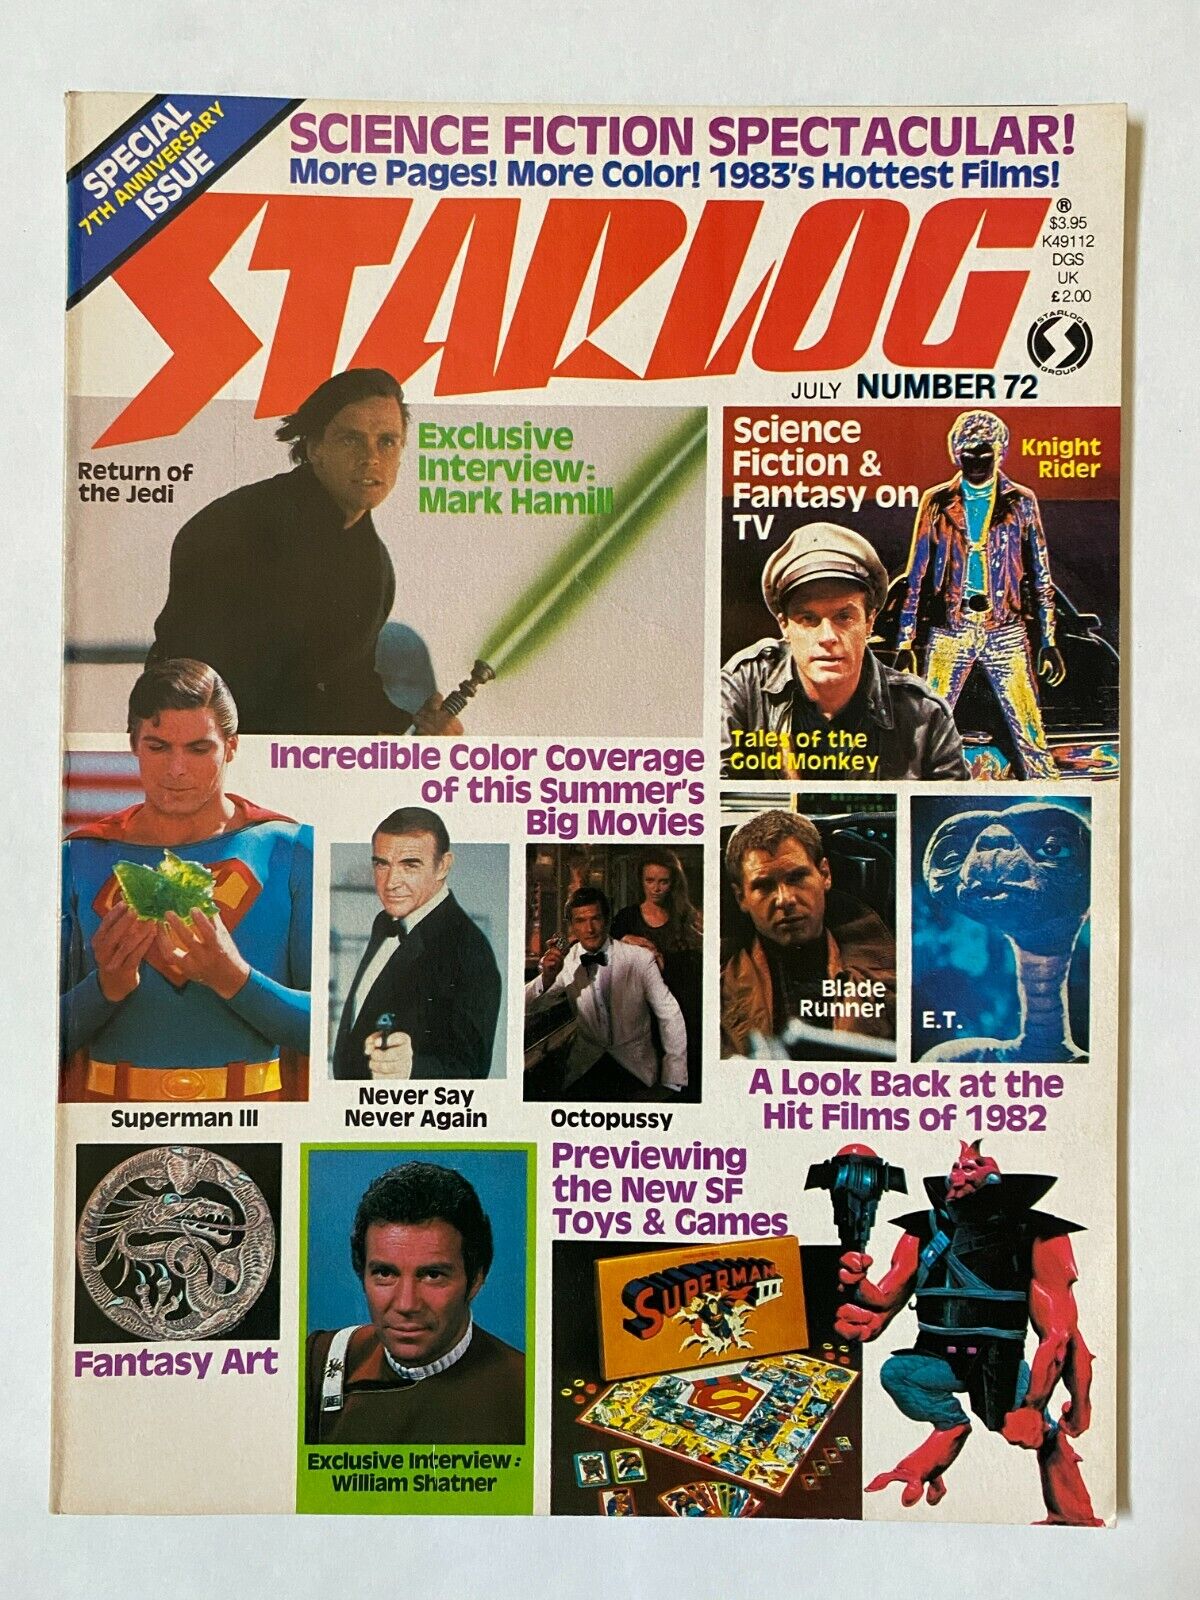 STARLOG #72 - 1983 July Featuring Science Fiction Spectacular On Cover VINTAGE